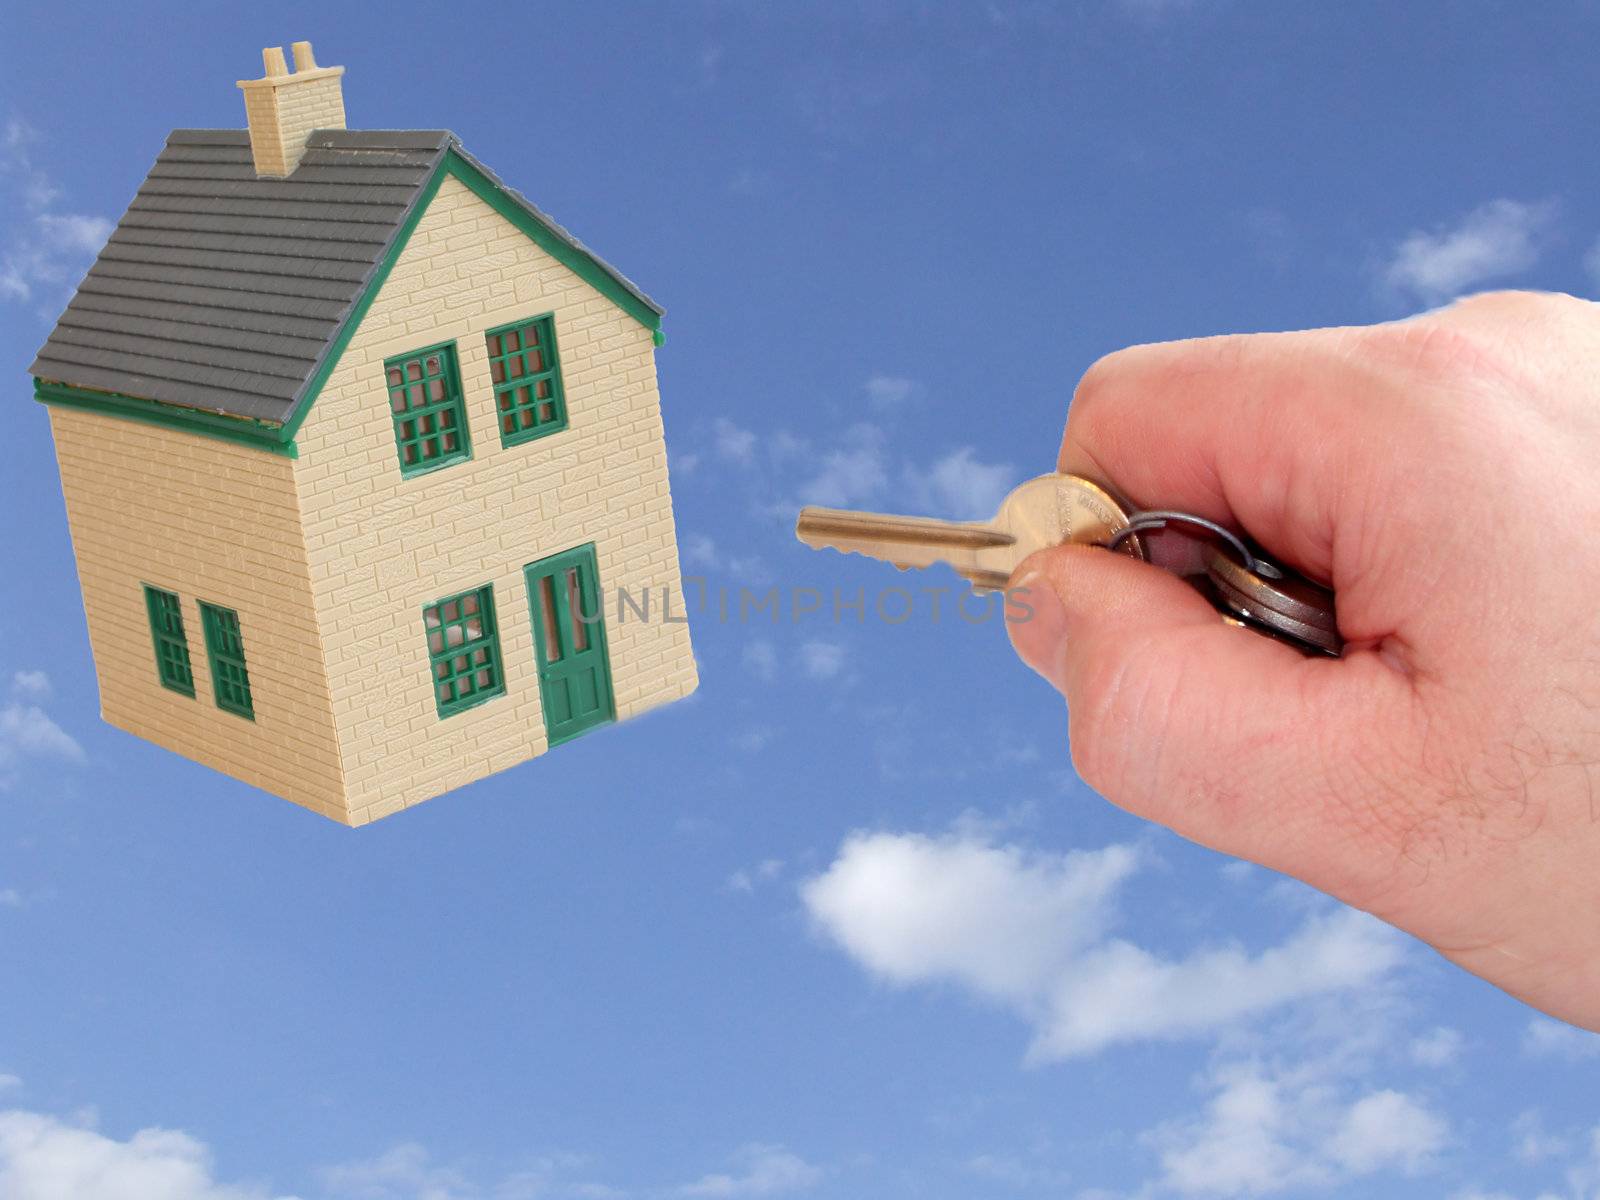 house and key in hand to open door on a sky back ground giving image of dreaming of a new house